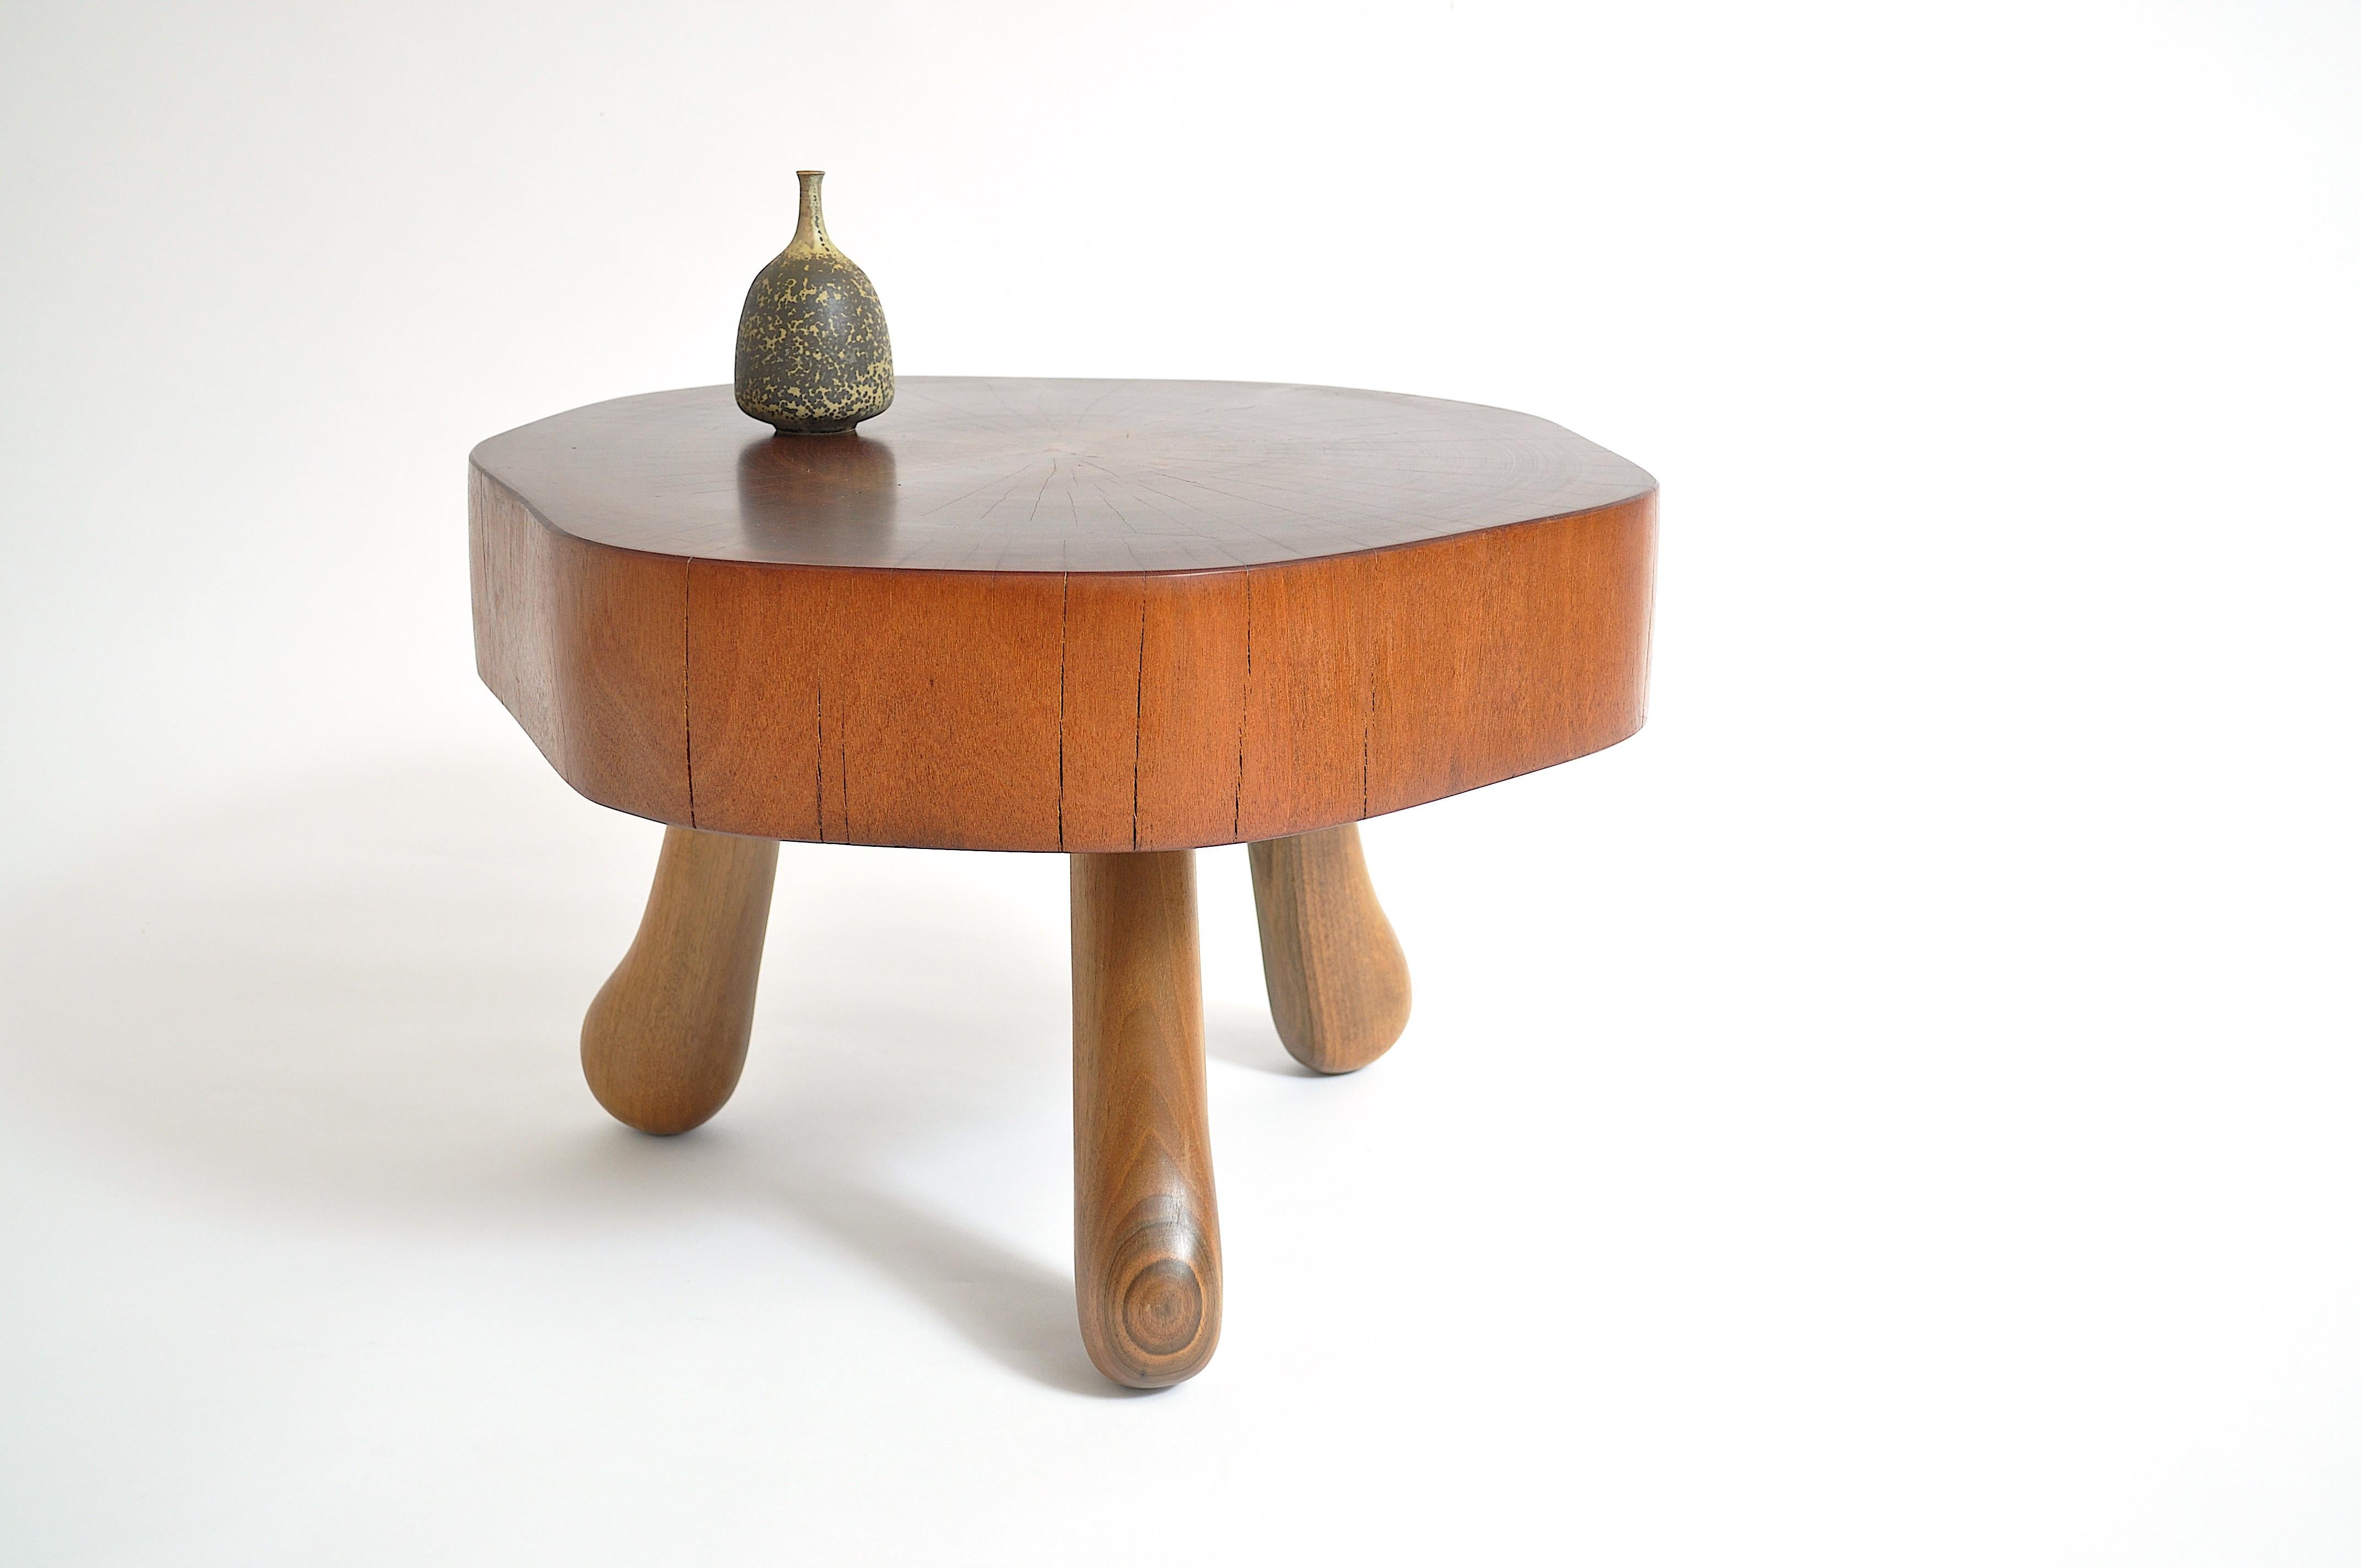 Unique signed table by Jörg Pietschmann
Materials: Padouk, European Walnut 
Measures: W 63 x D 63 x H 40 cm


In Pietschmann’s sculptures, trees that for centuries were part of a landscape and founded in primordial forces tell stories inscribed in